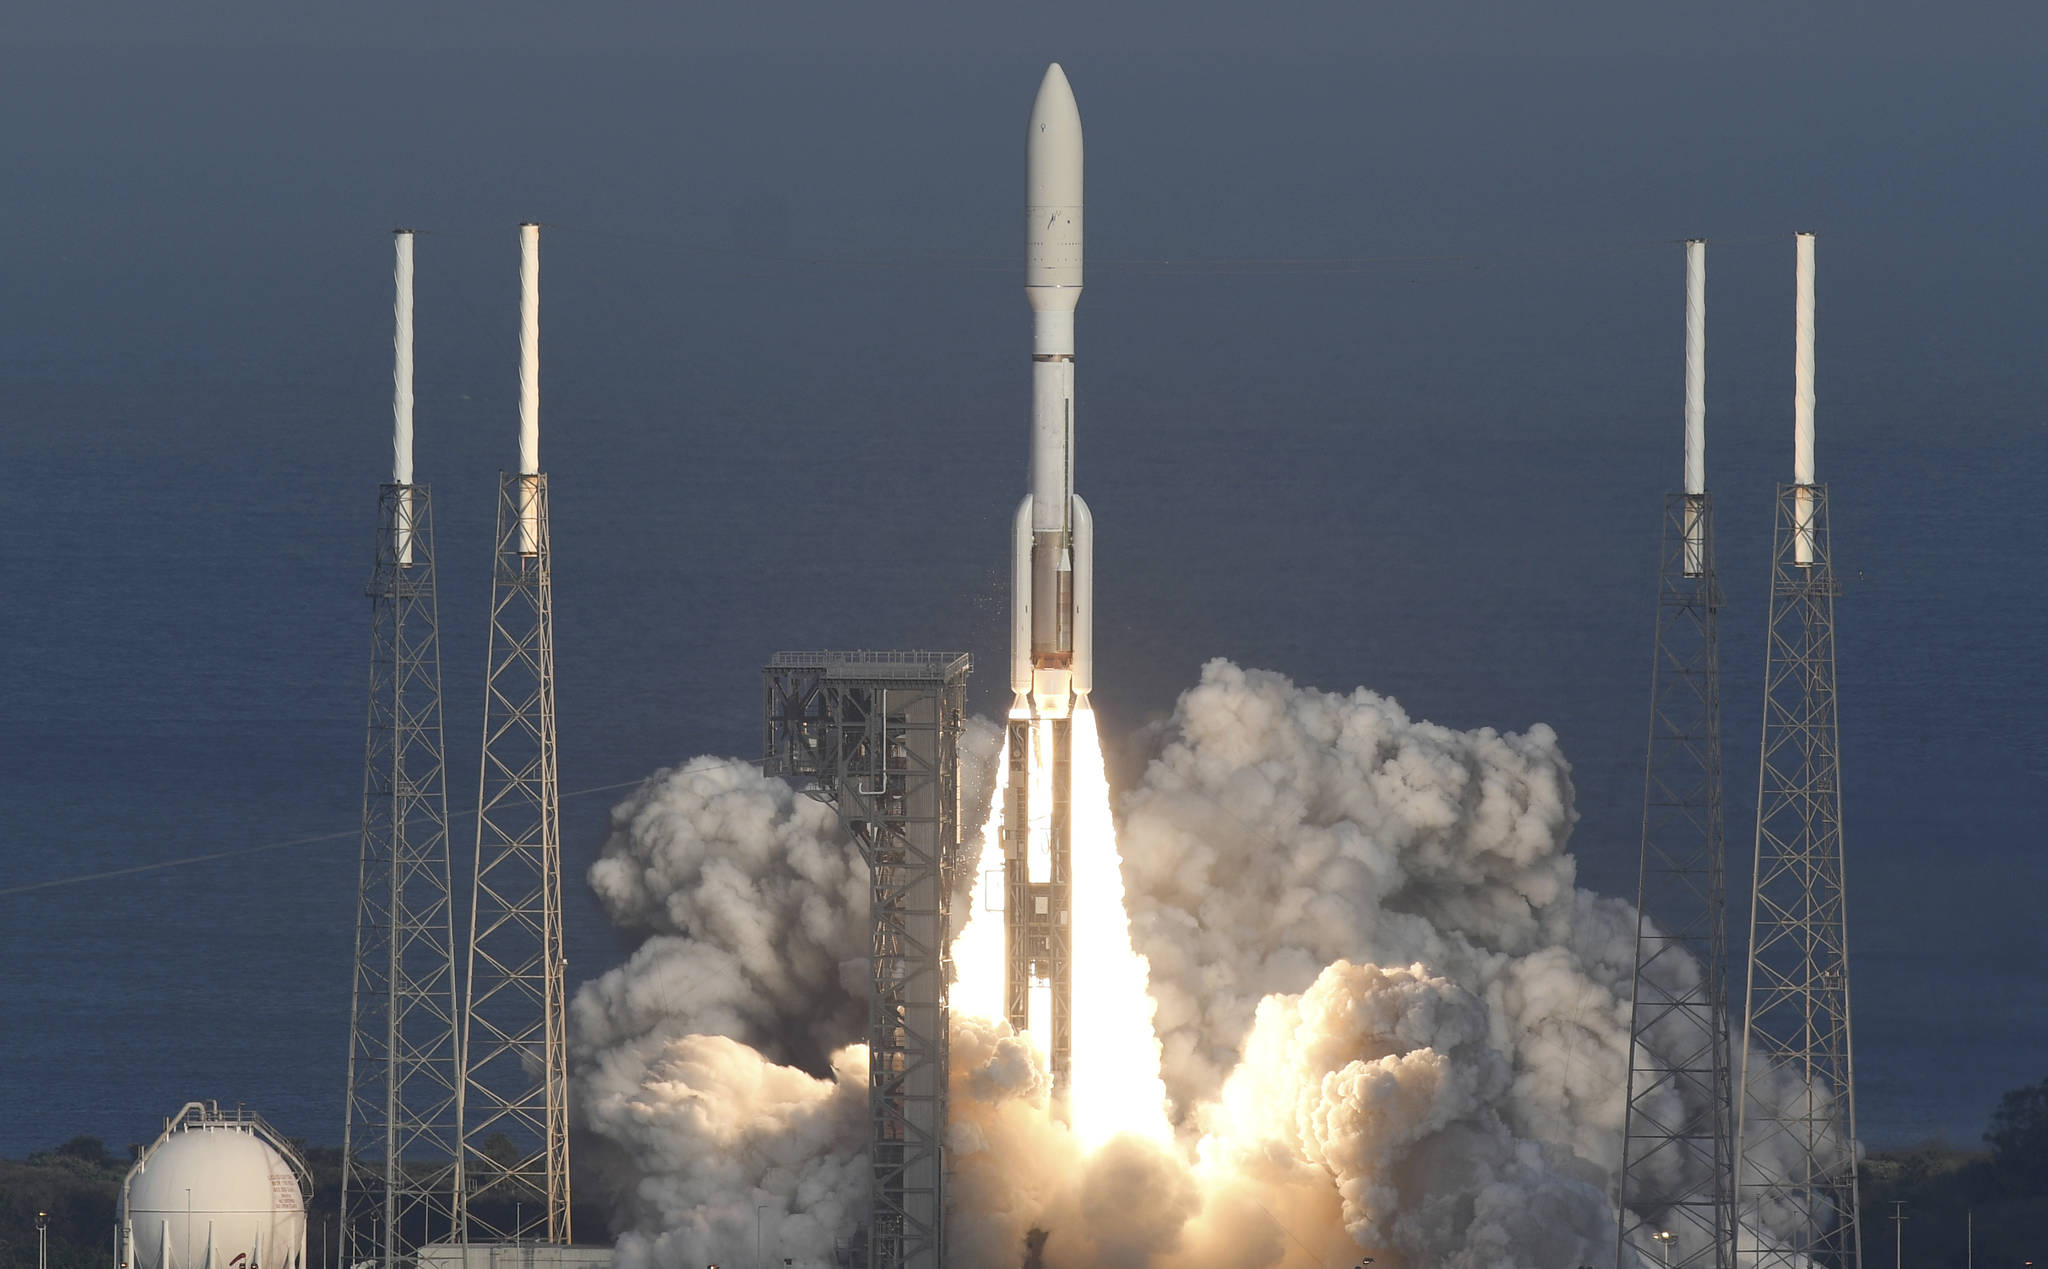 A United Launch Alliance Atlas V rocket lifts off from Cape Canaveral Air Force Station Thursday. The rocket is carrying the GOES-S weather satellite. (Craig Bailey /Florida Today via AP)